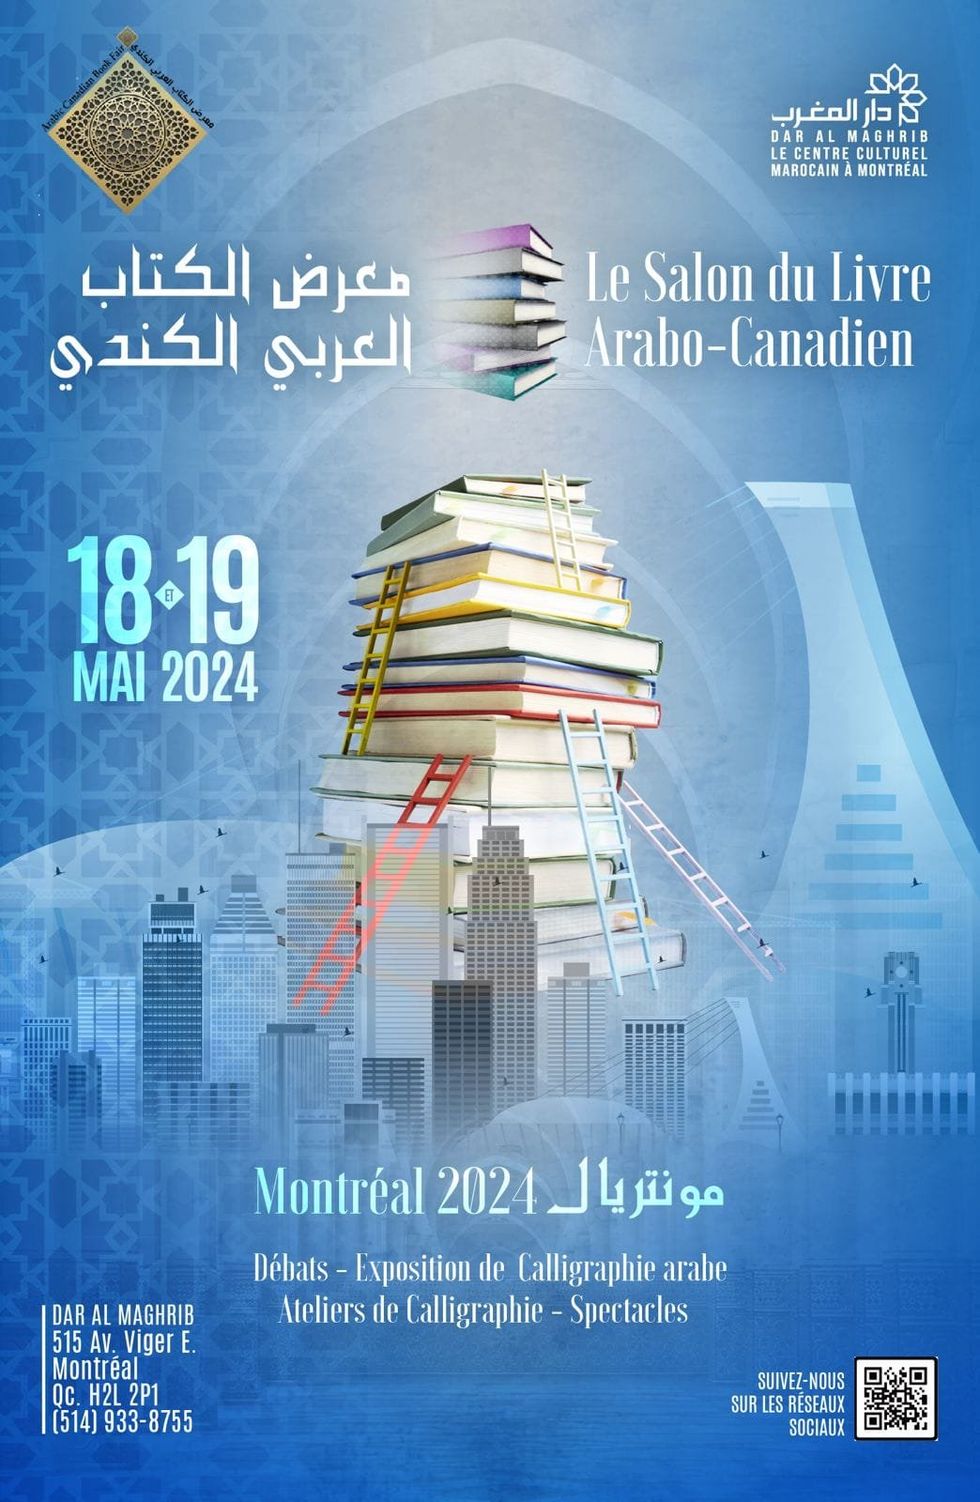 \u200bA poster for an upcoming book fair in Montreal featuring a stack of books with ladders and a city skyline featuring iconic Montreal landmarks.